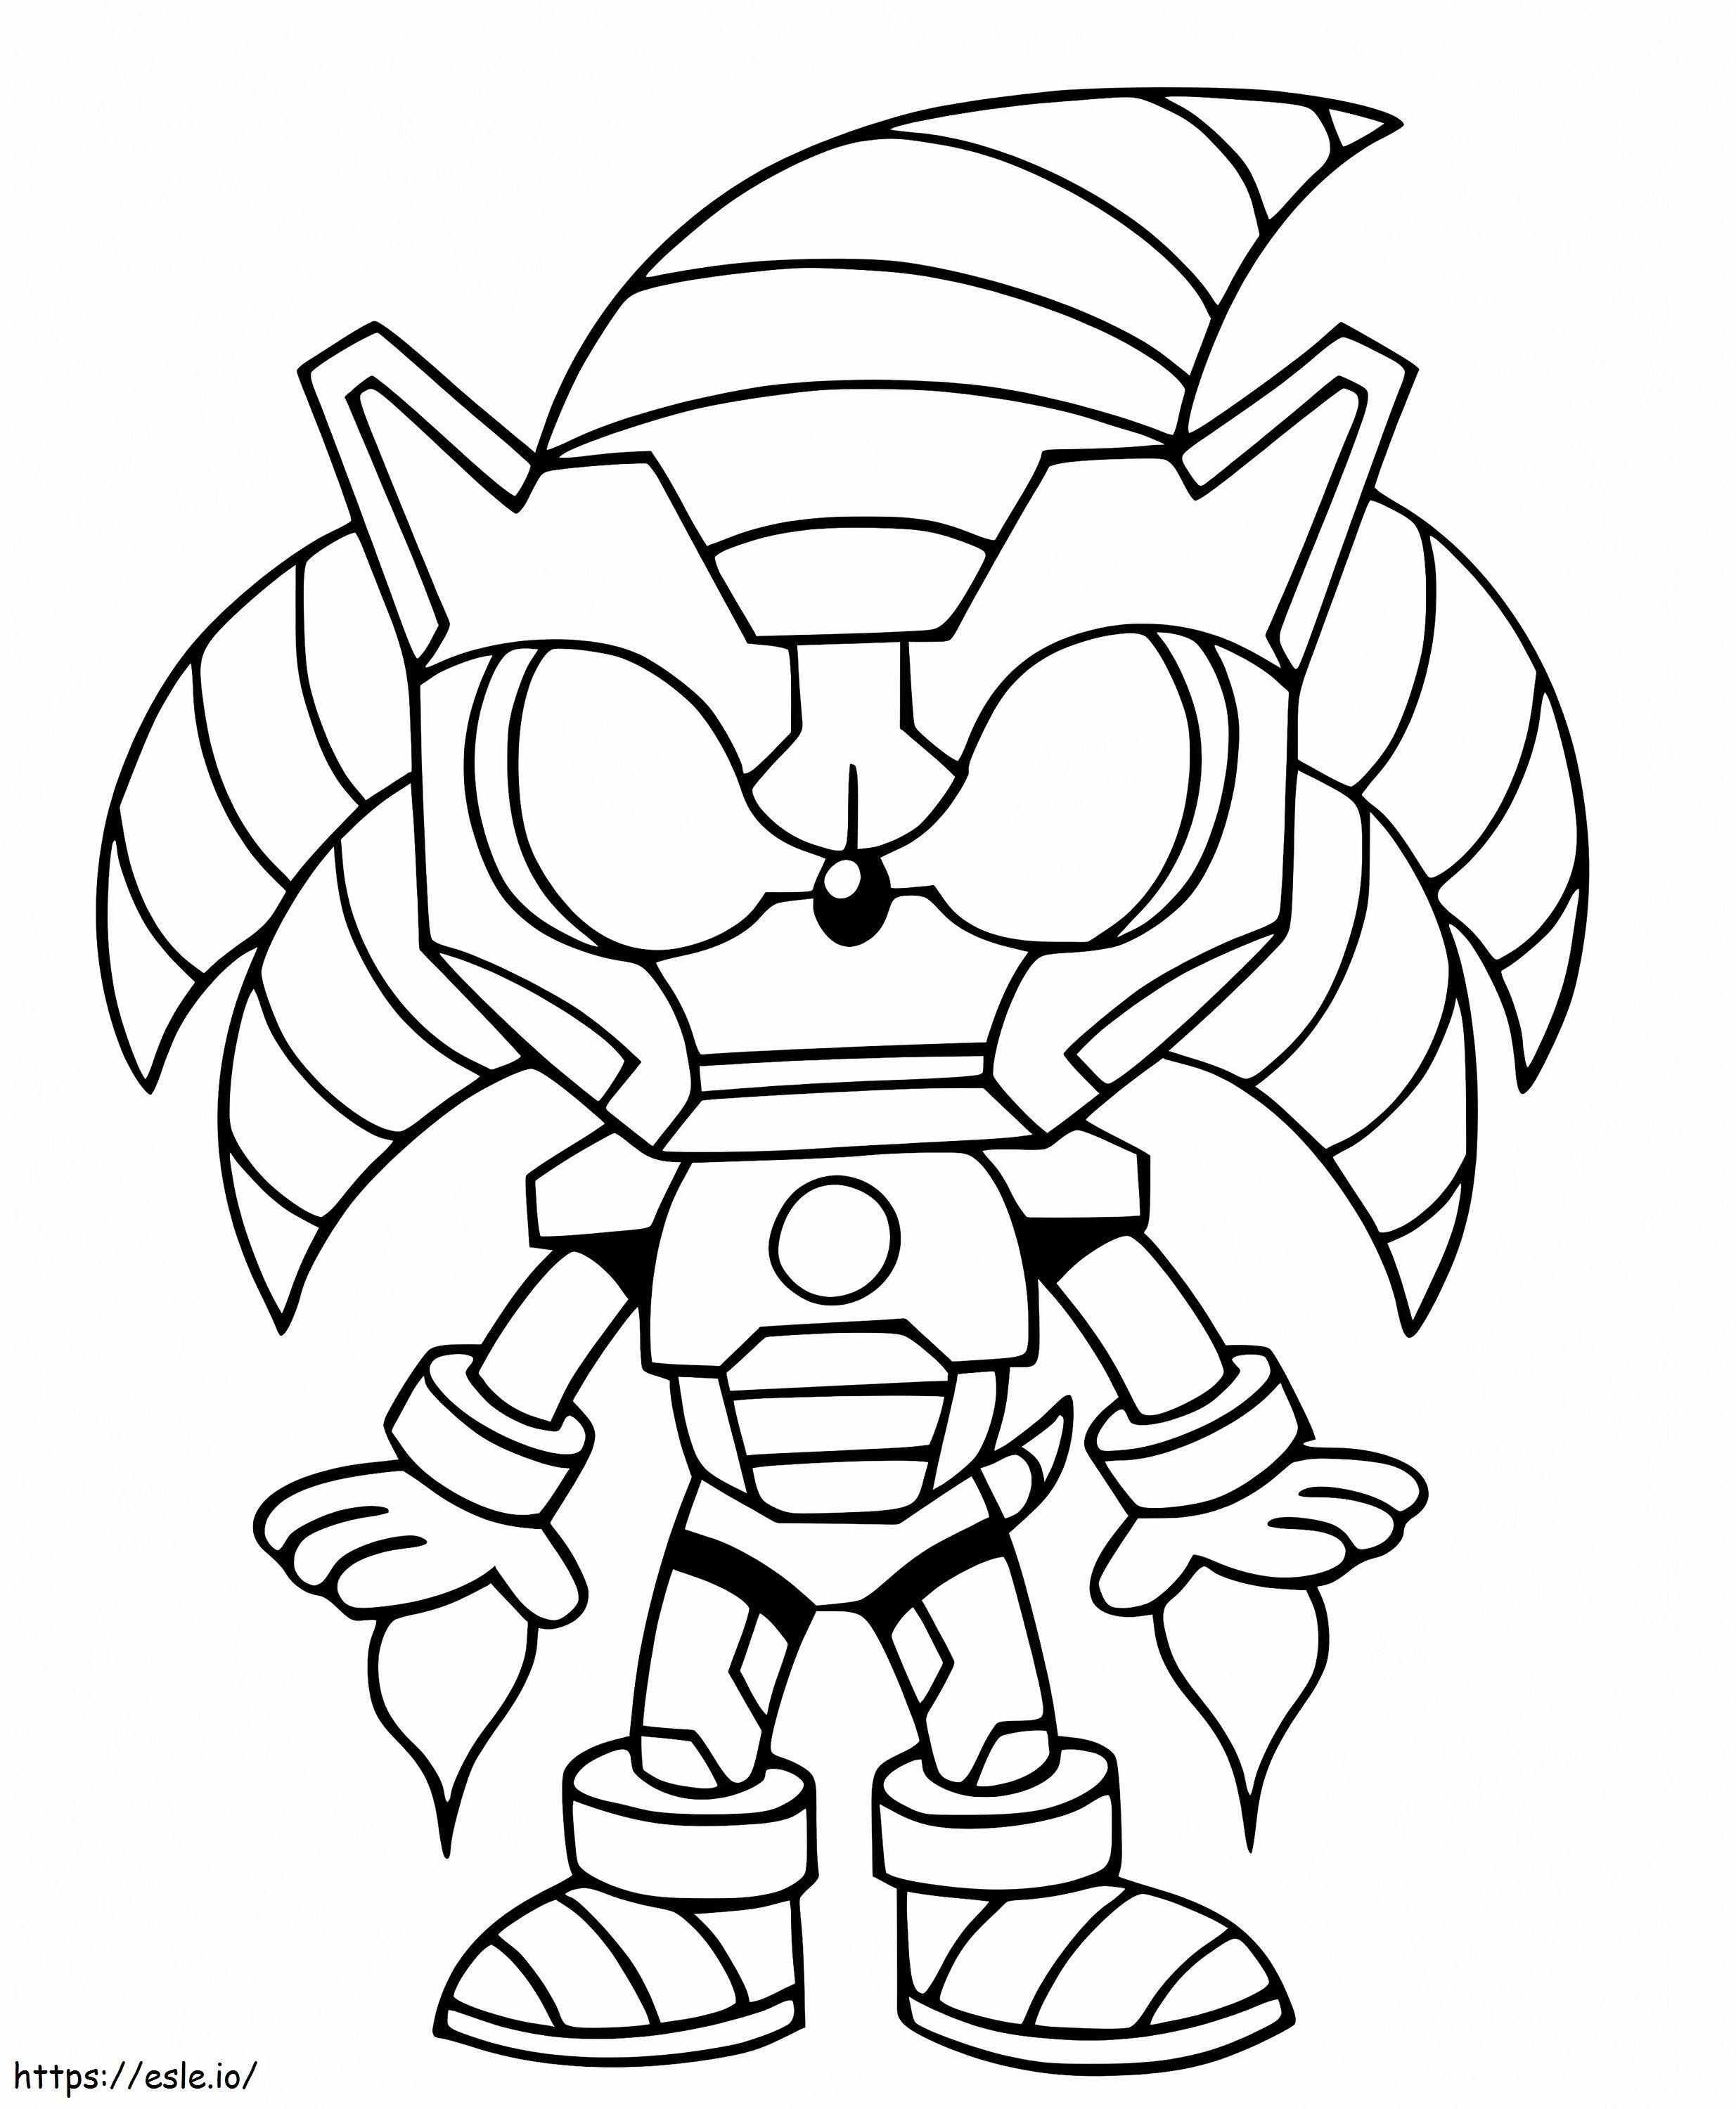 Iron Man Sonic coloring page